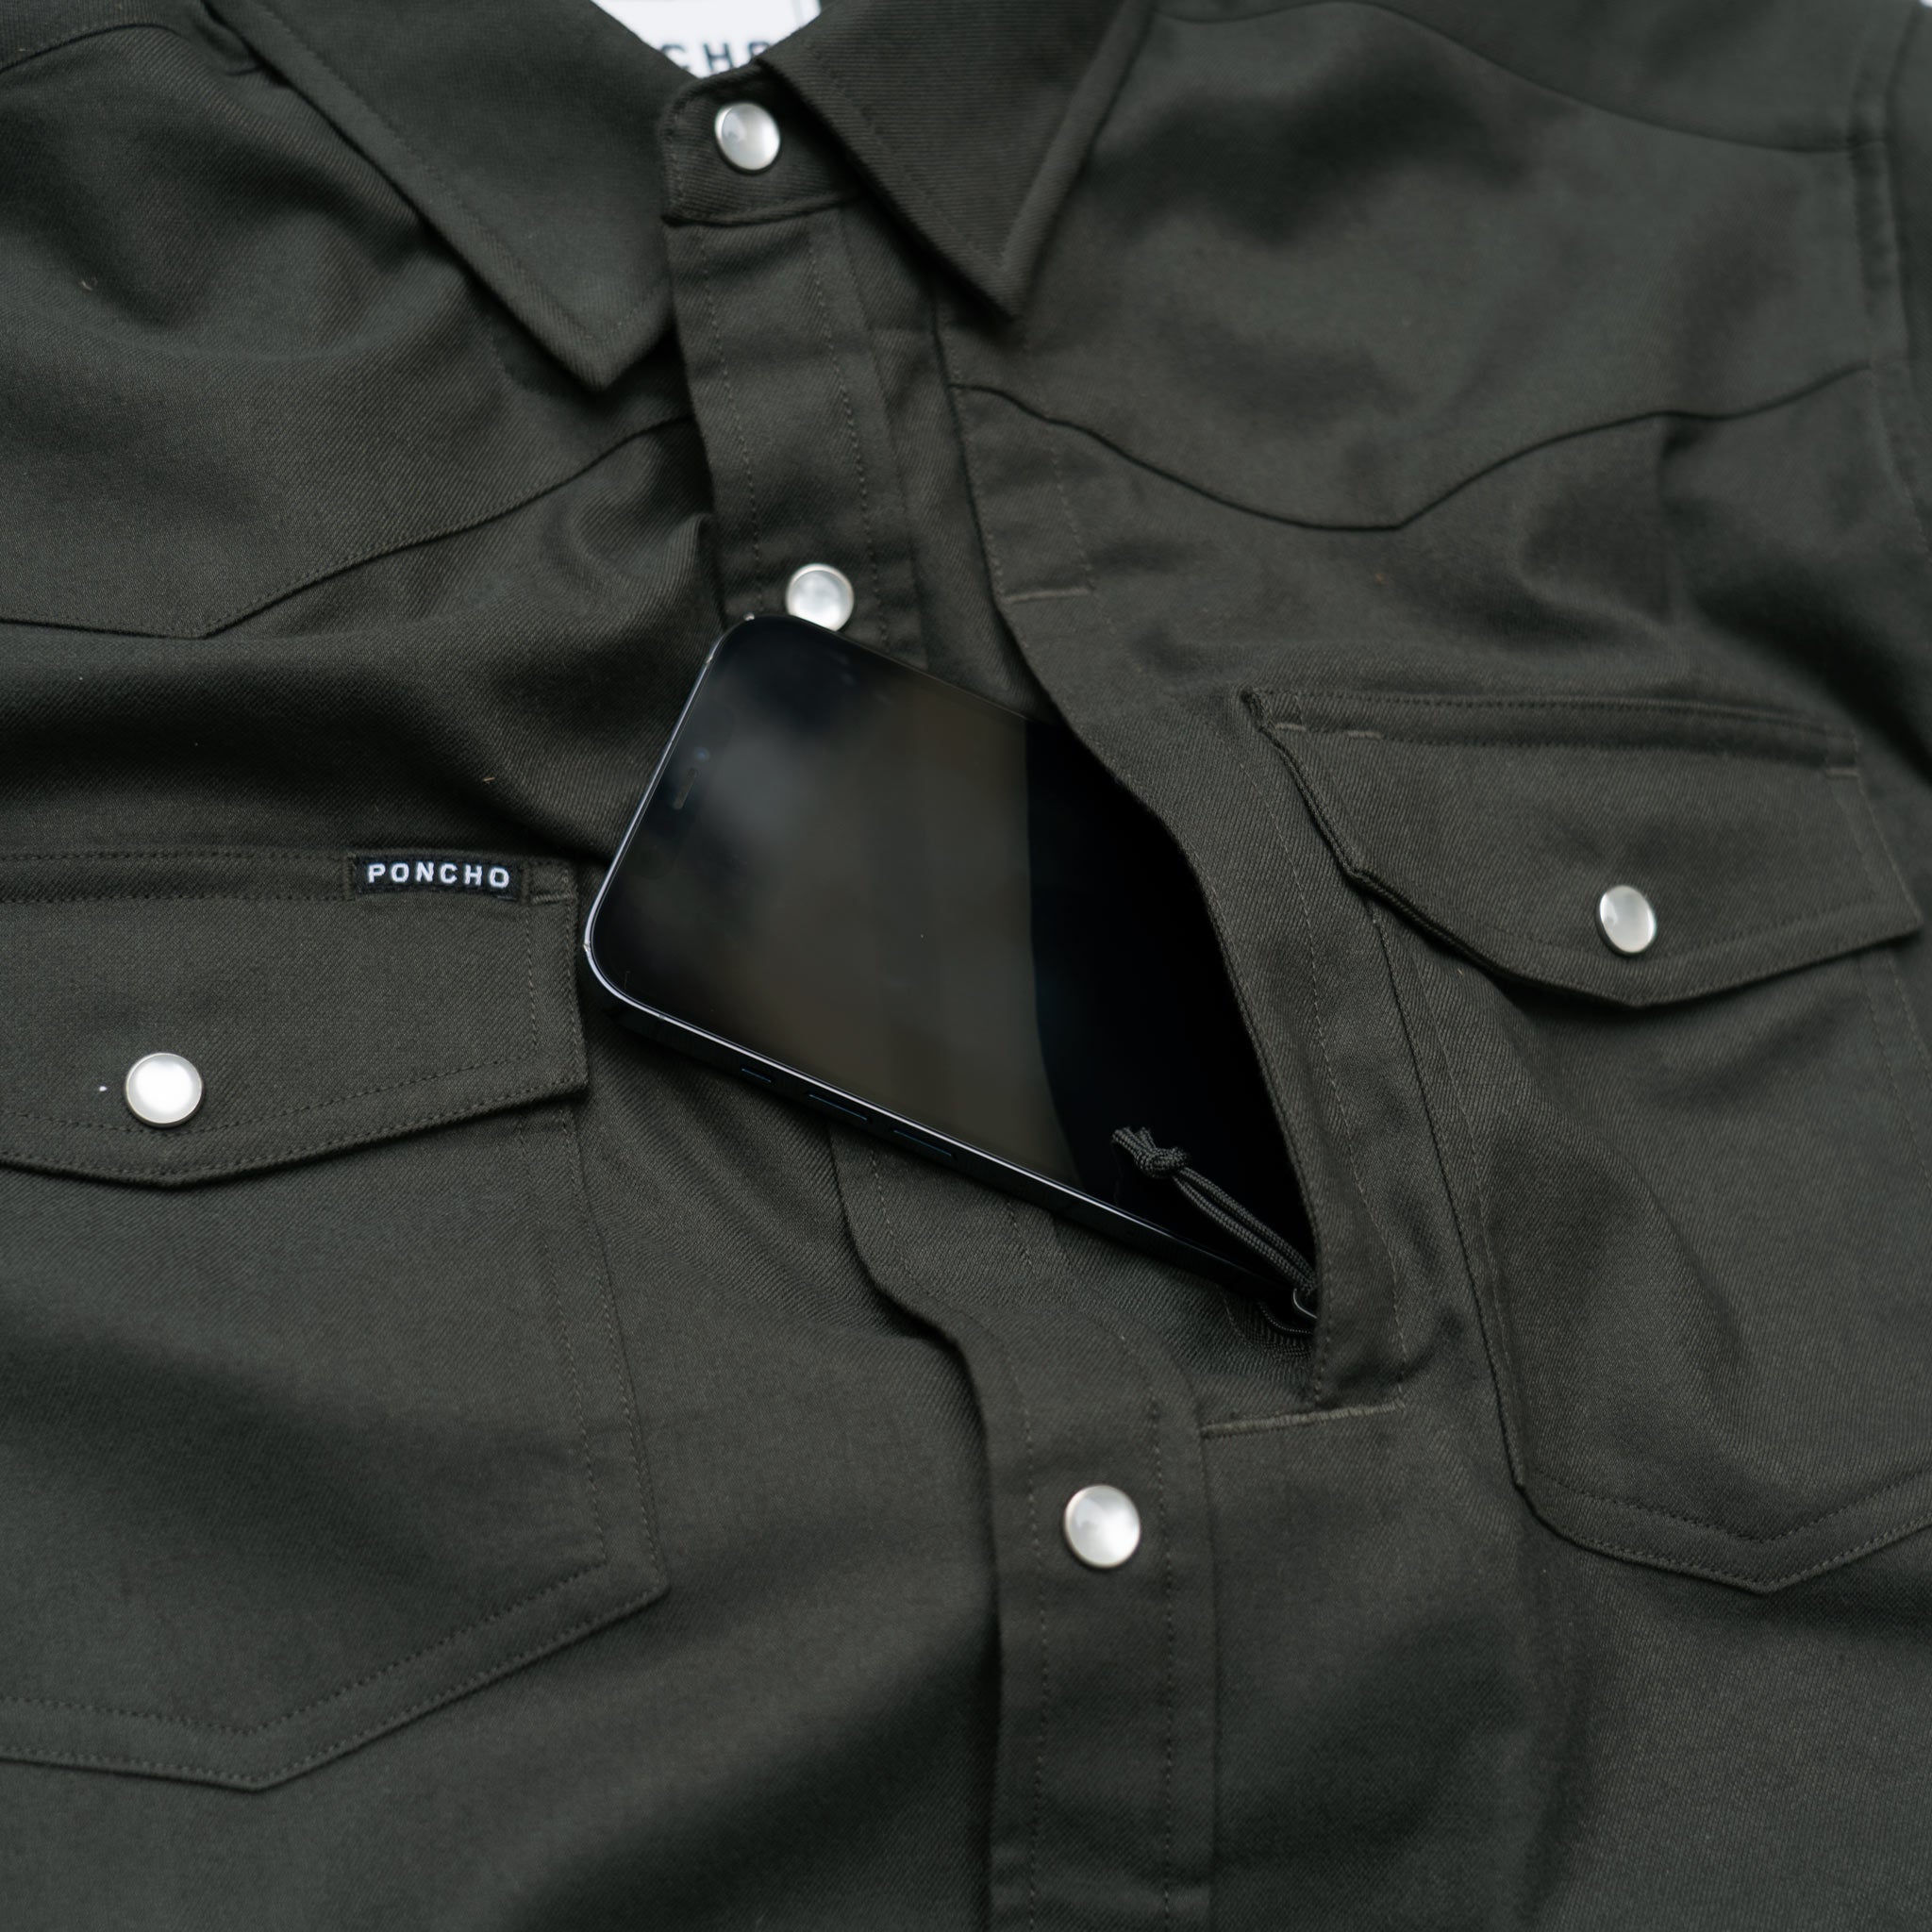 phone in chest pocket in shirt